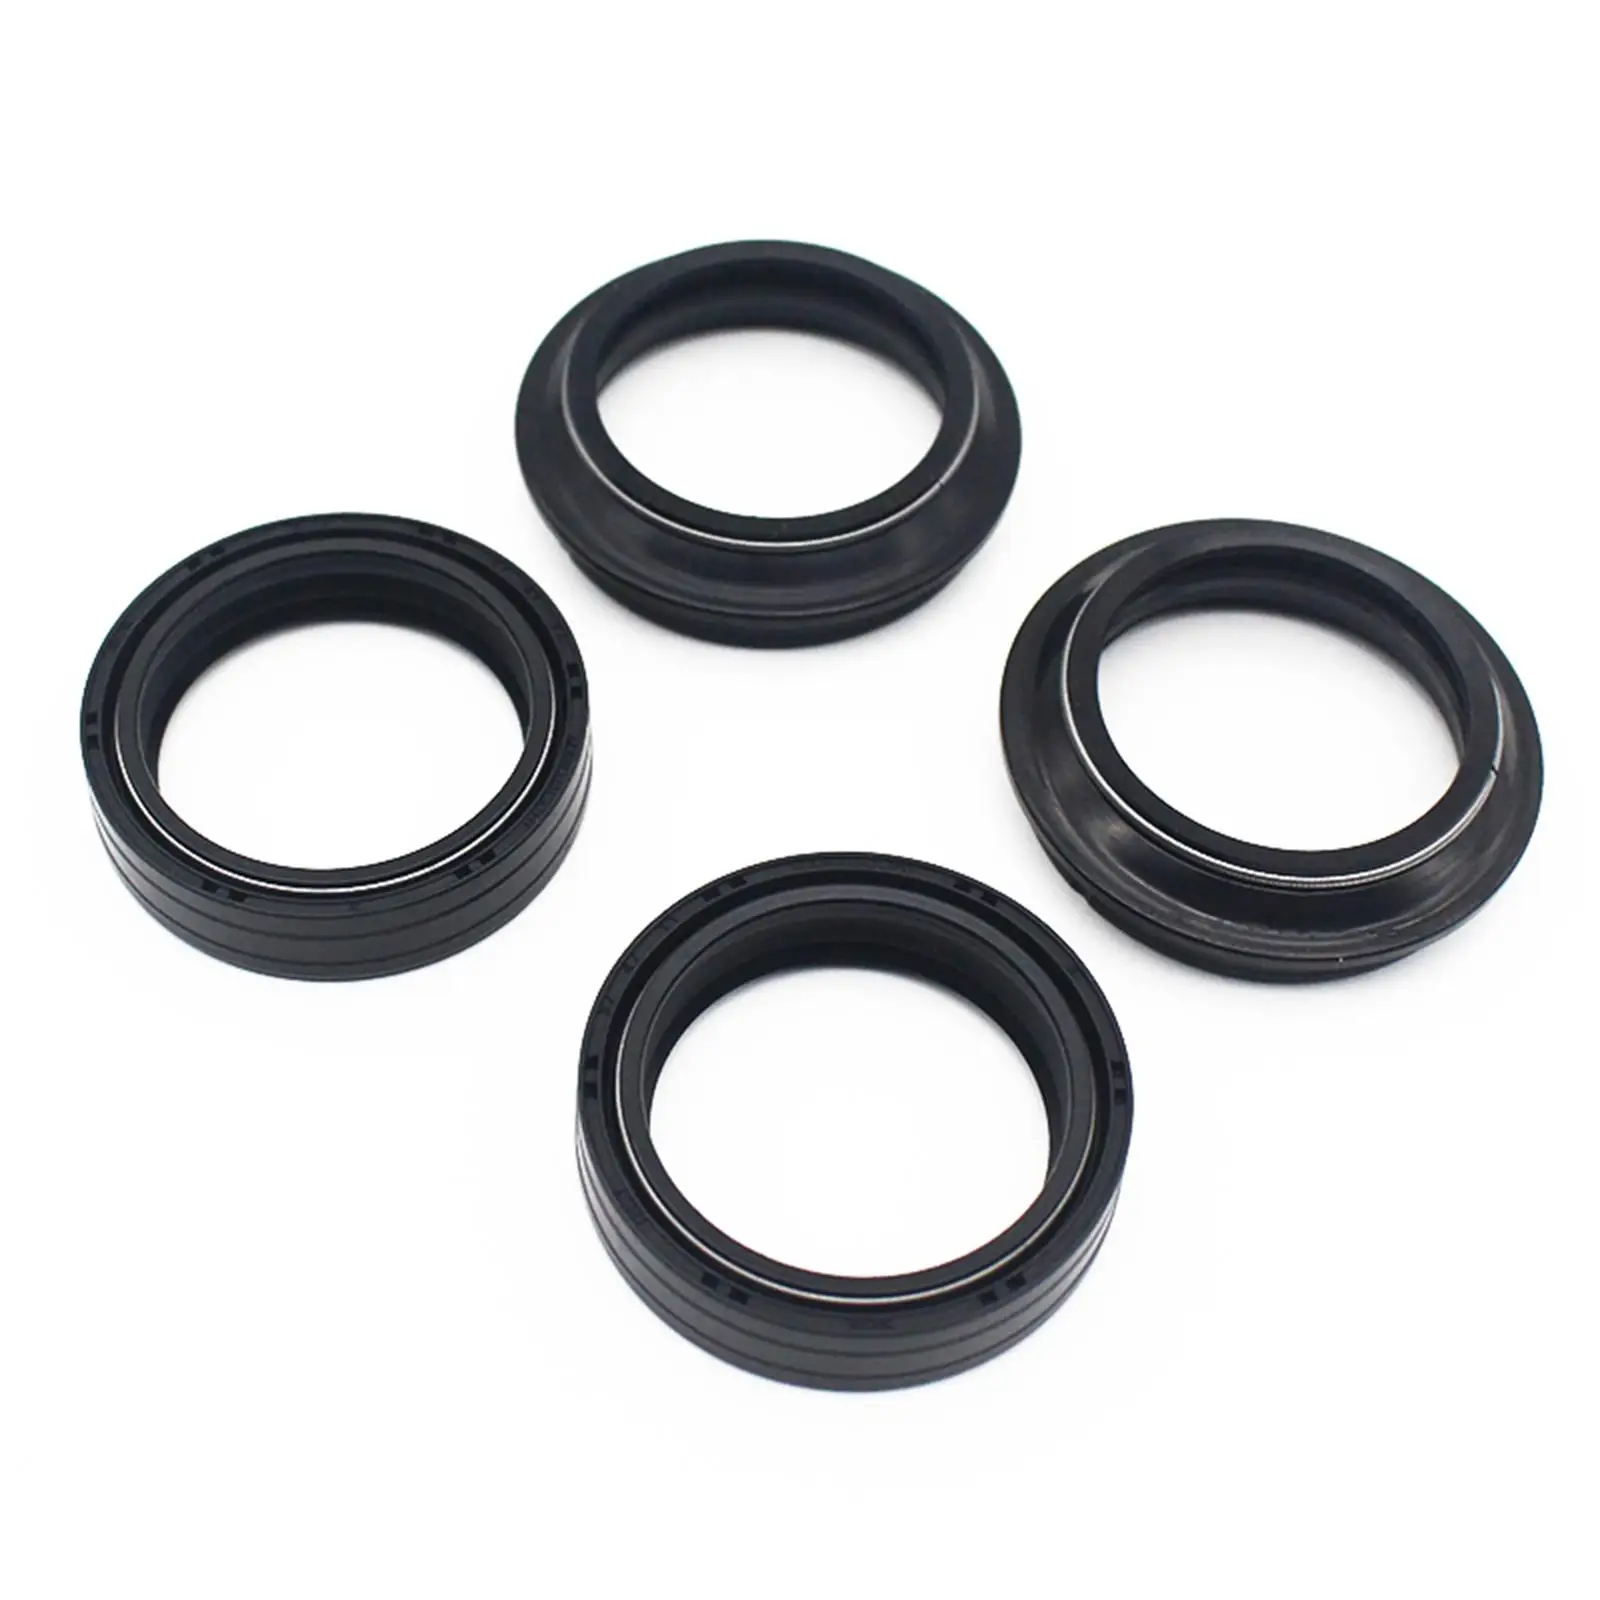 2-4pack Fork and Dust Seal Motorcycle Accessories for BMW R1200GS Adventure